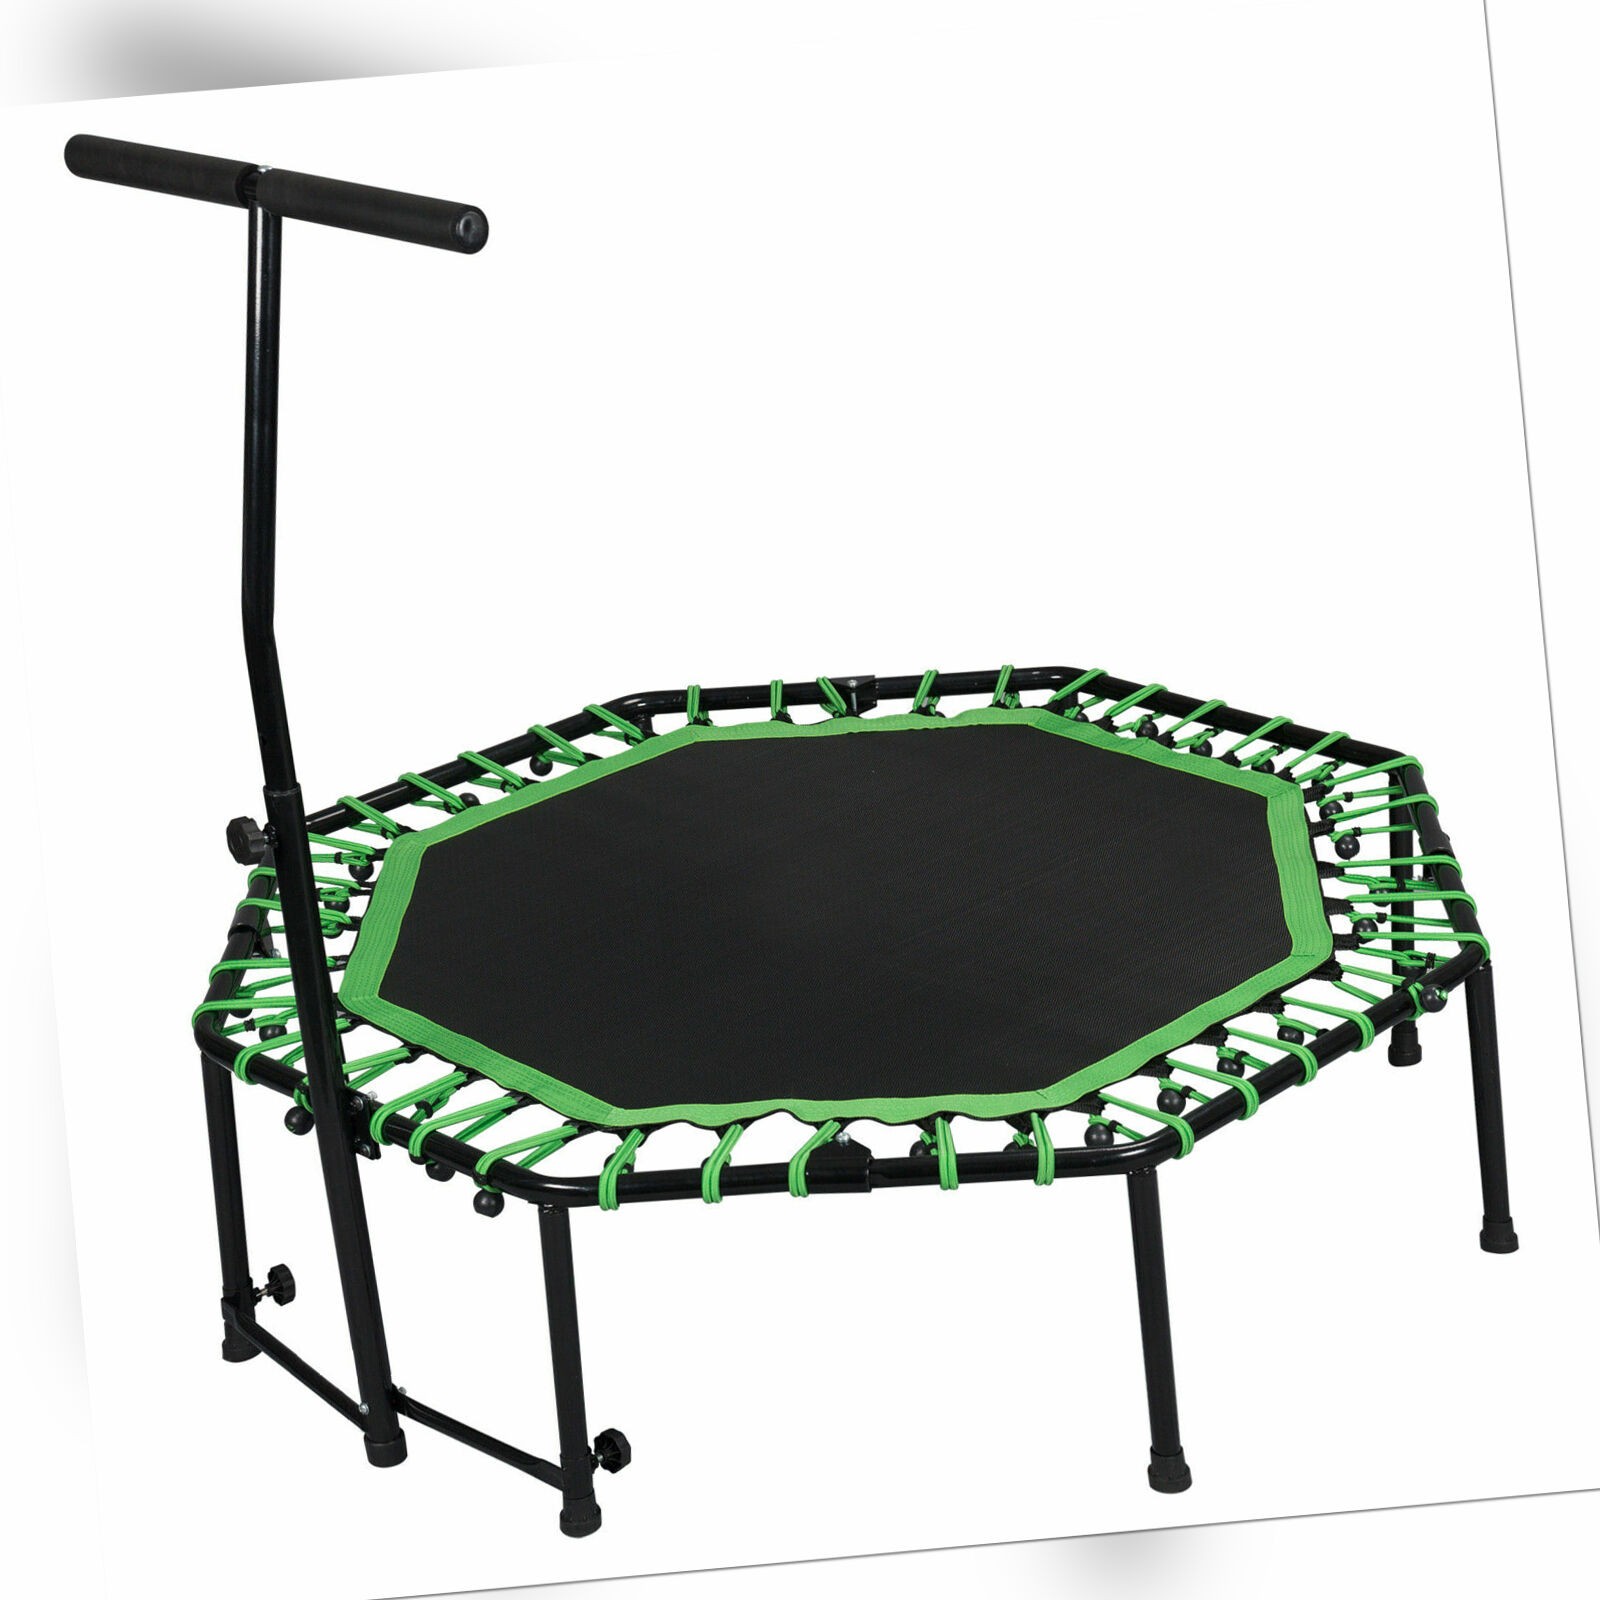 Fitness Trampolin Sport Leise Mini Indoor Outdoor Griff Seilfederung Jumping